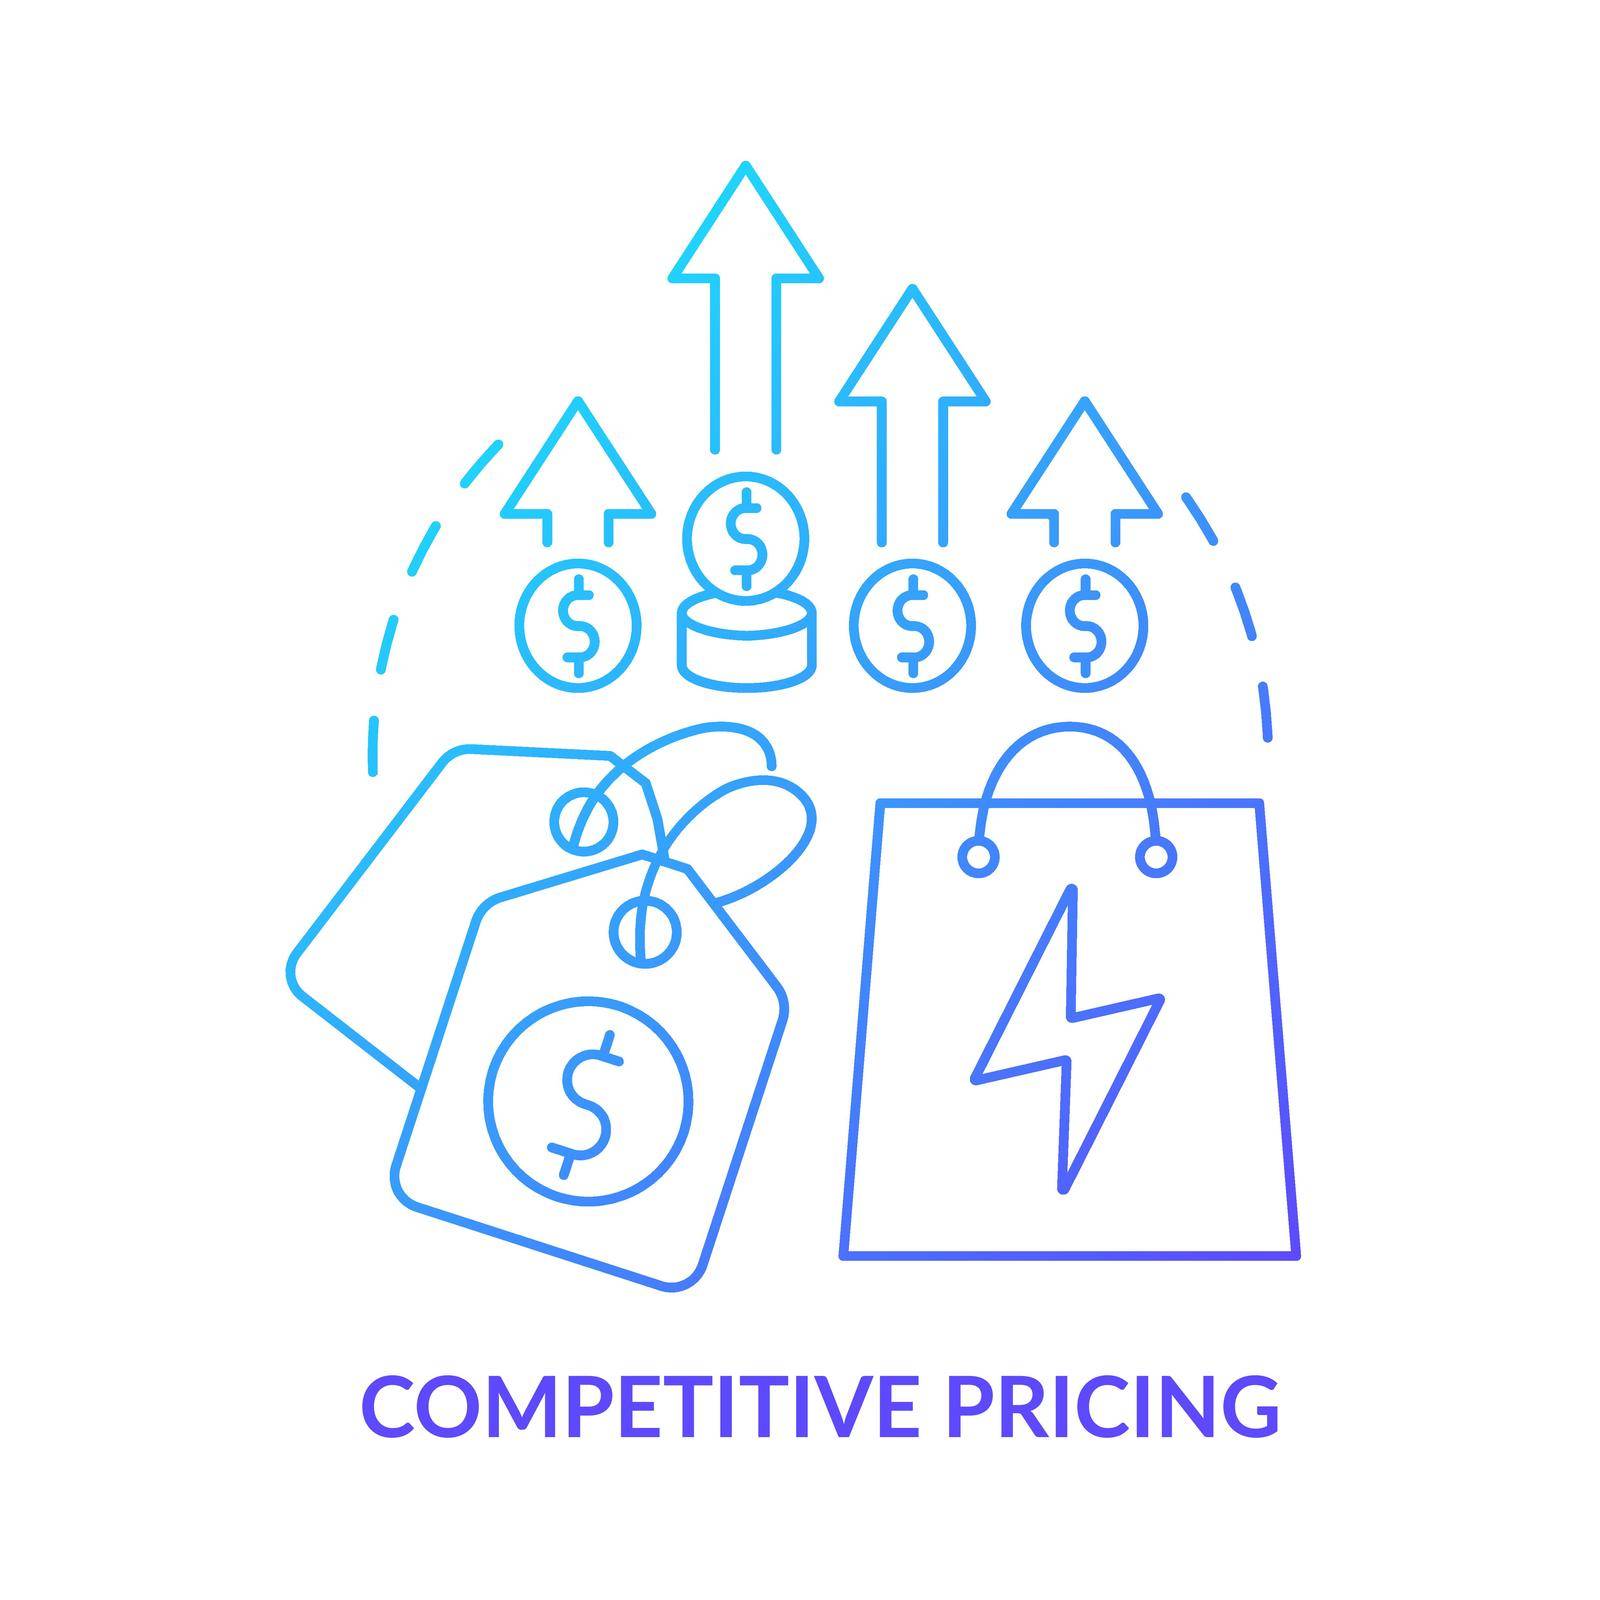 Competitive pricing blue gradient concept icon by bsd